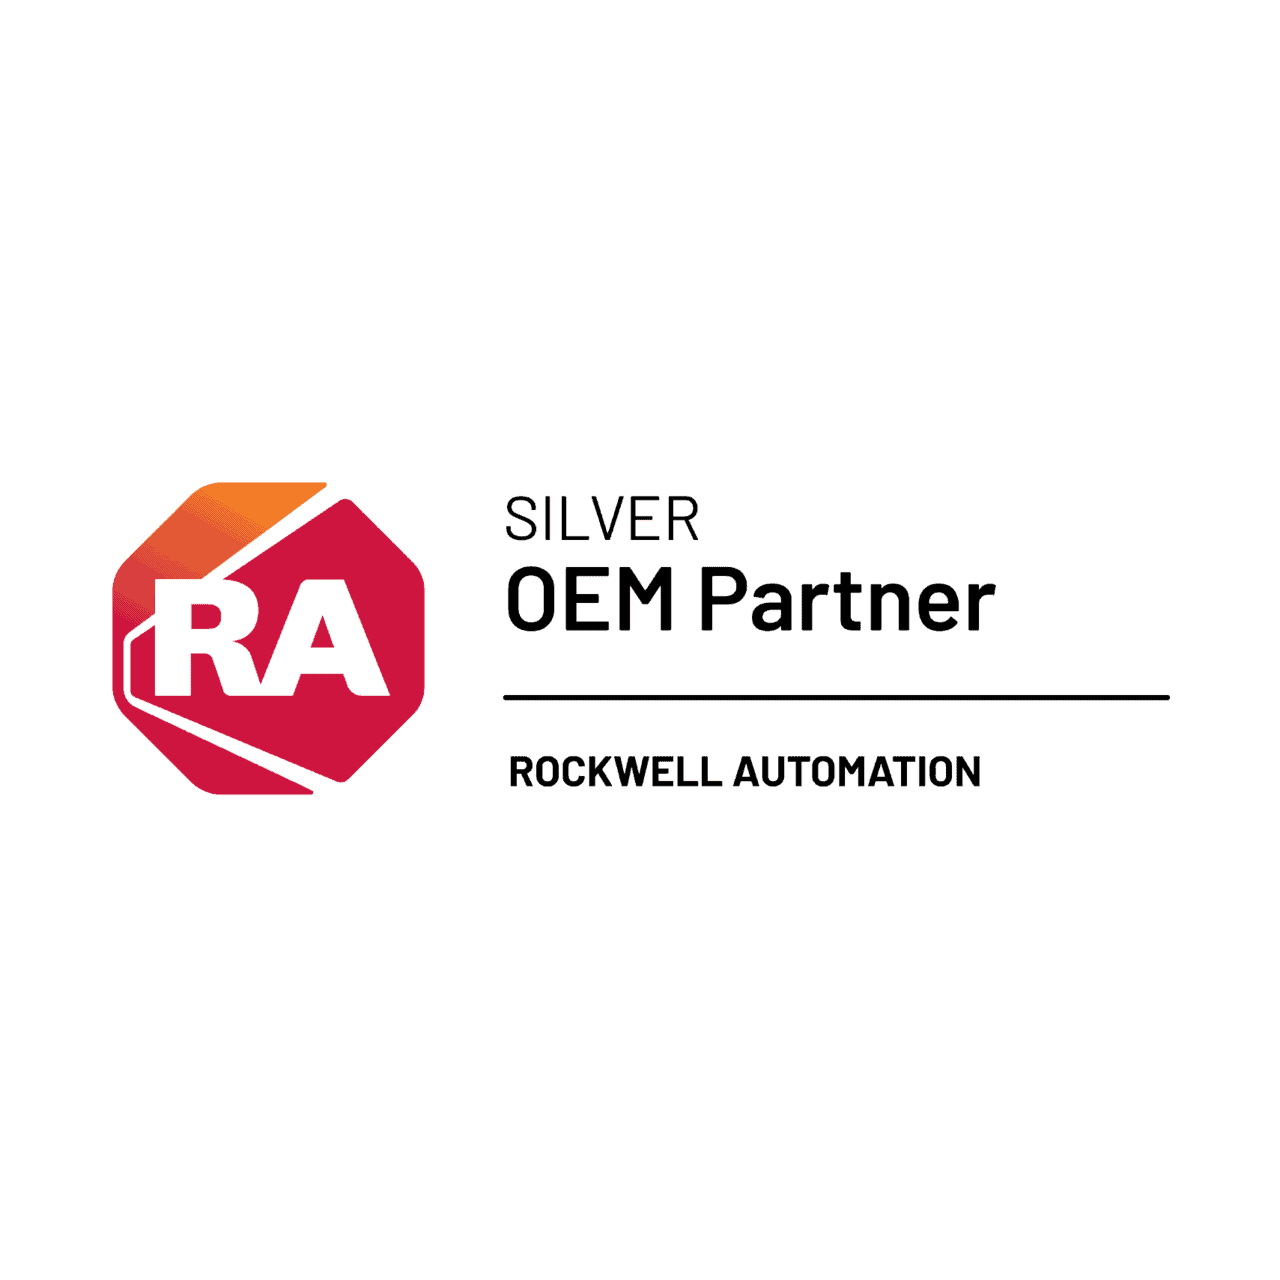 Rockwell Automation - Silver OEM Partner